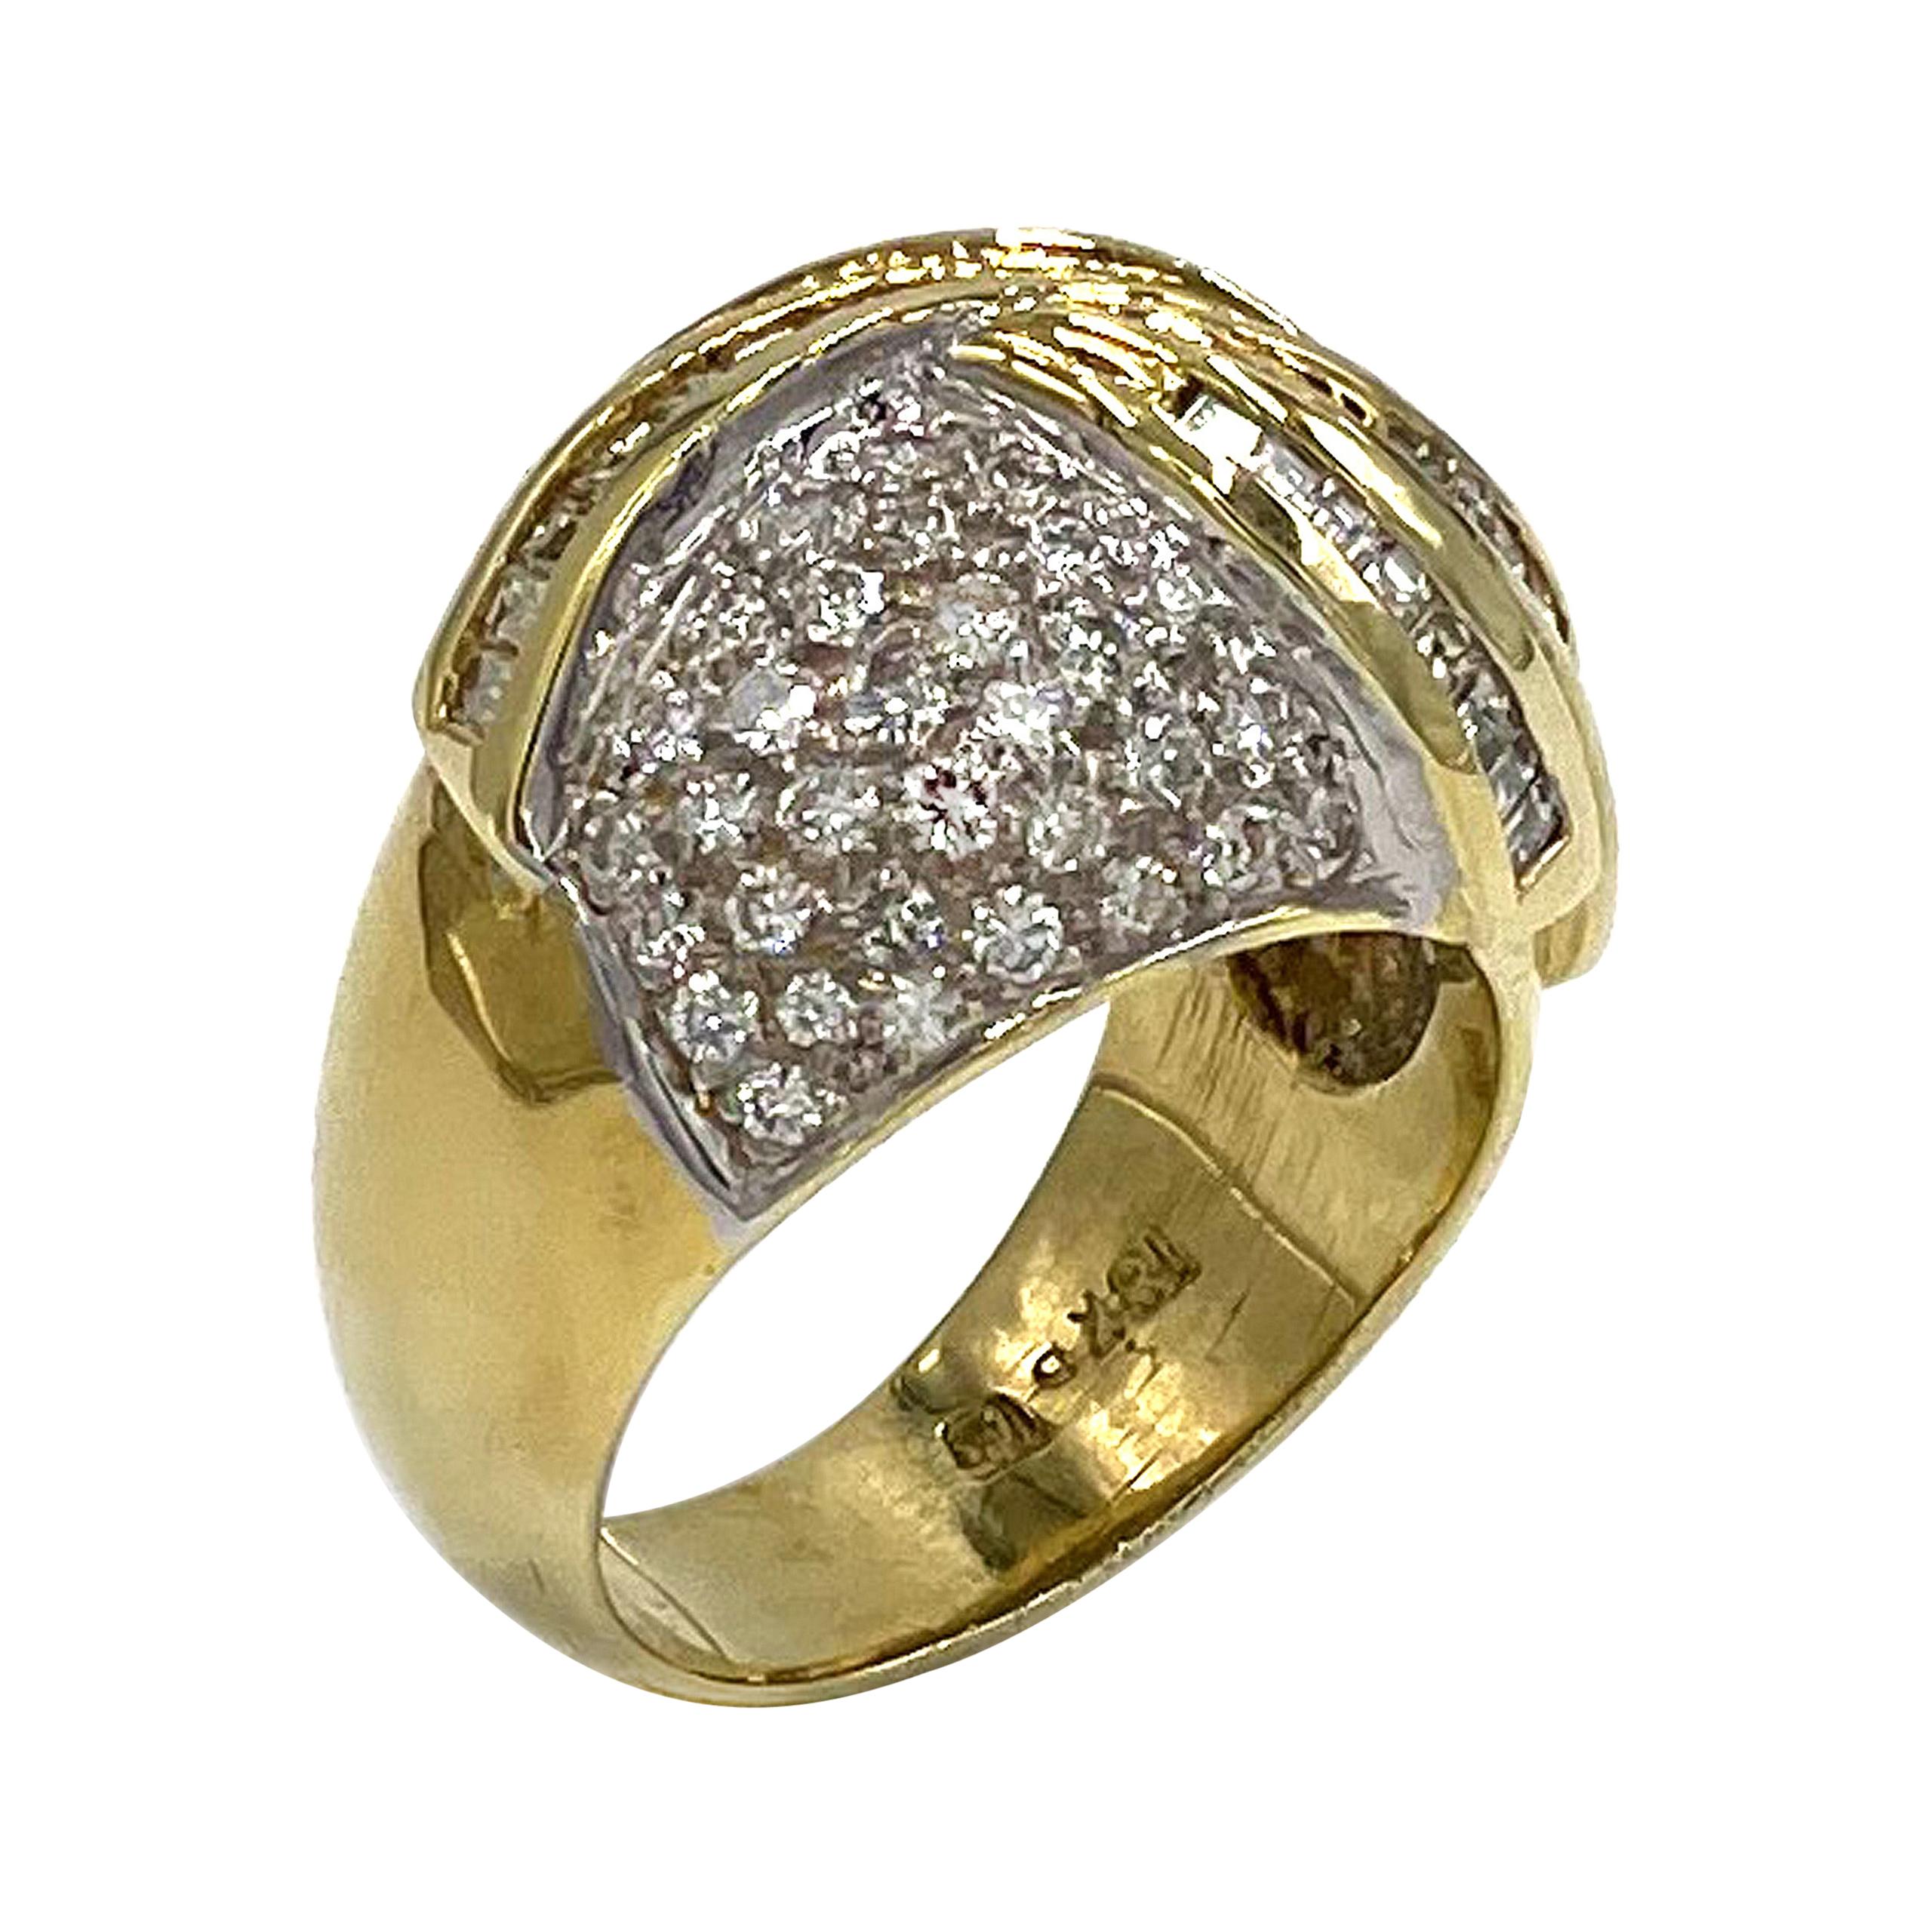 Vintage 18k Two Tone Pave Dome Ring, Circa 1985